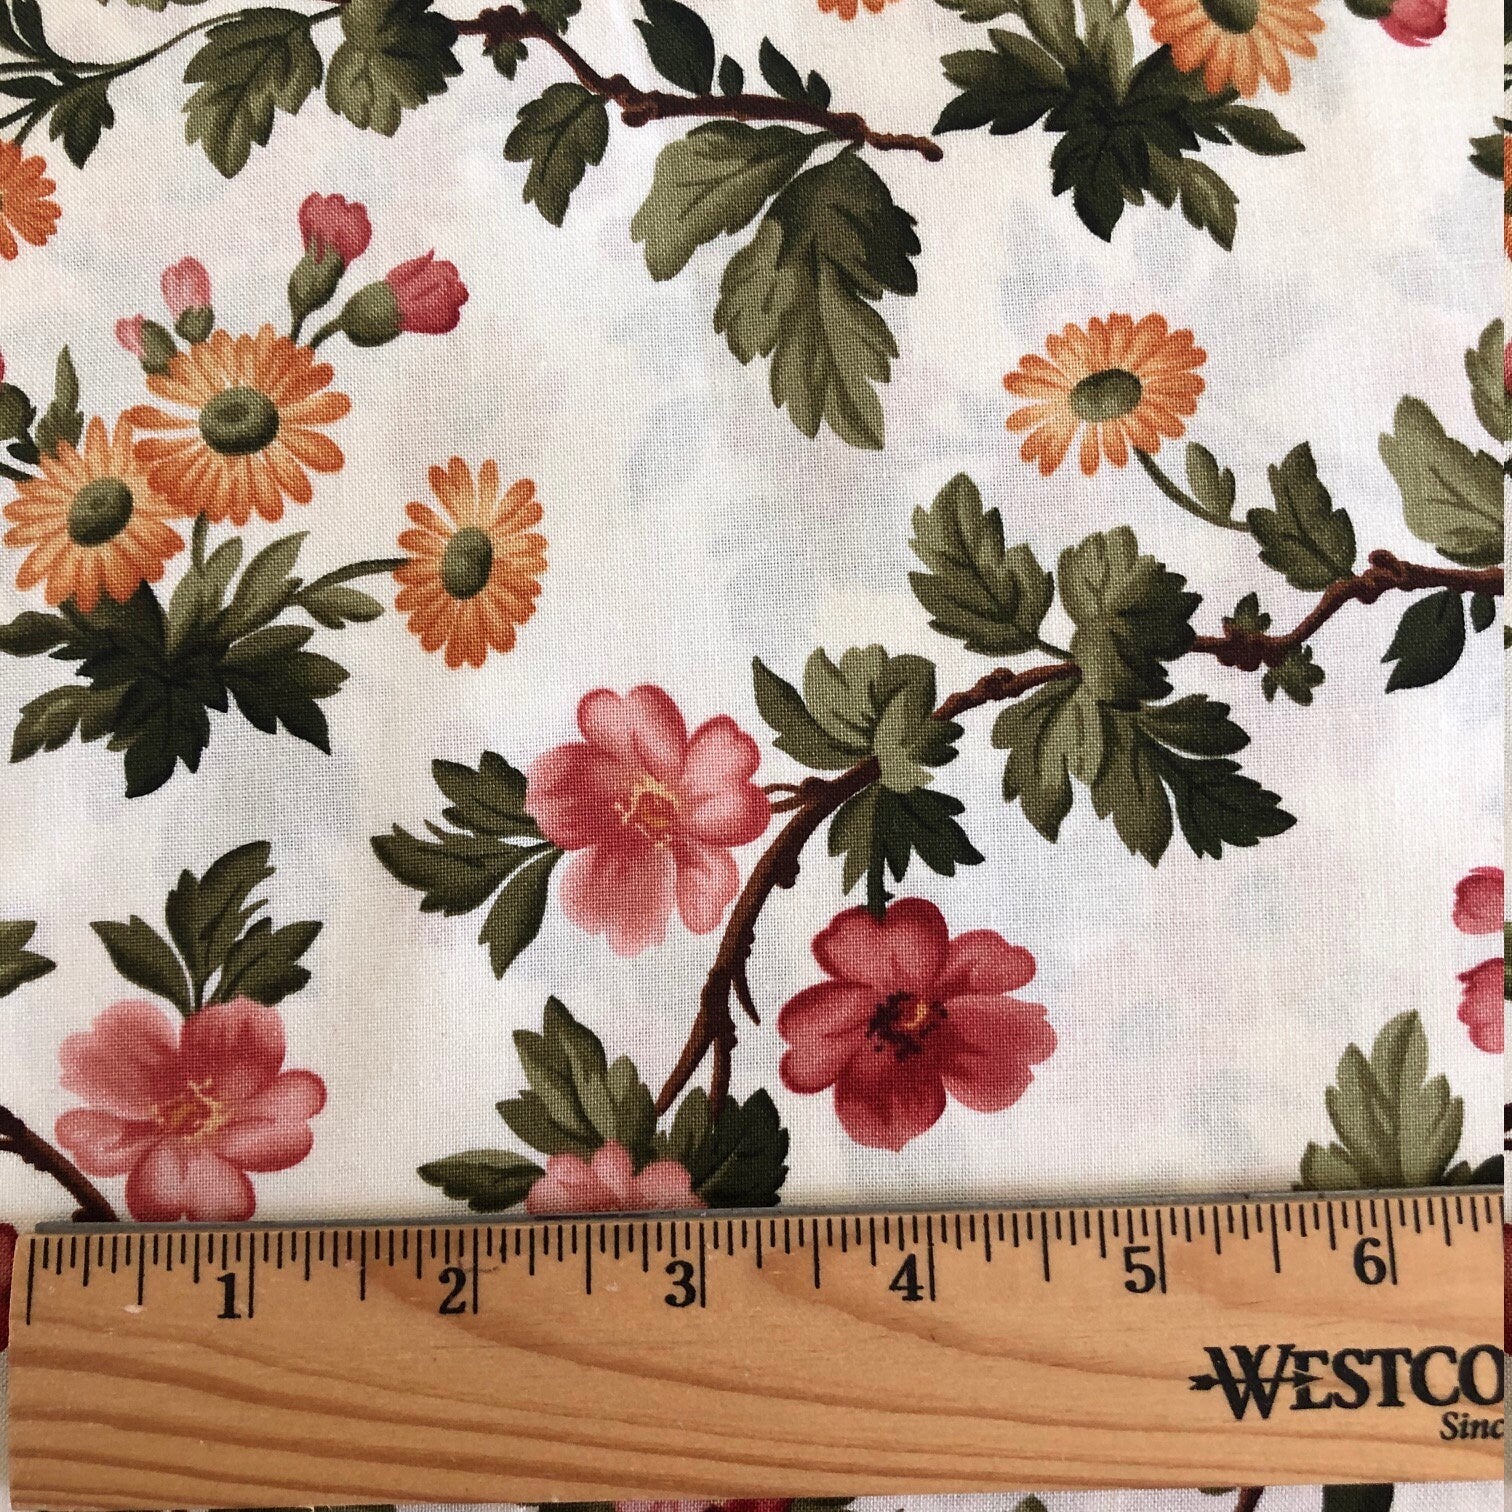 A Fruitful Life - Pink Yellow Red Flowers on Cream Fabric, Maywood Studio MAS9326-E Ecru, Floral Cotton Quilting Fabric, By the Yard